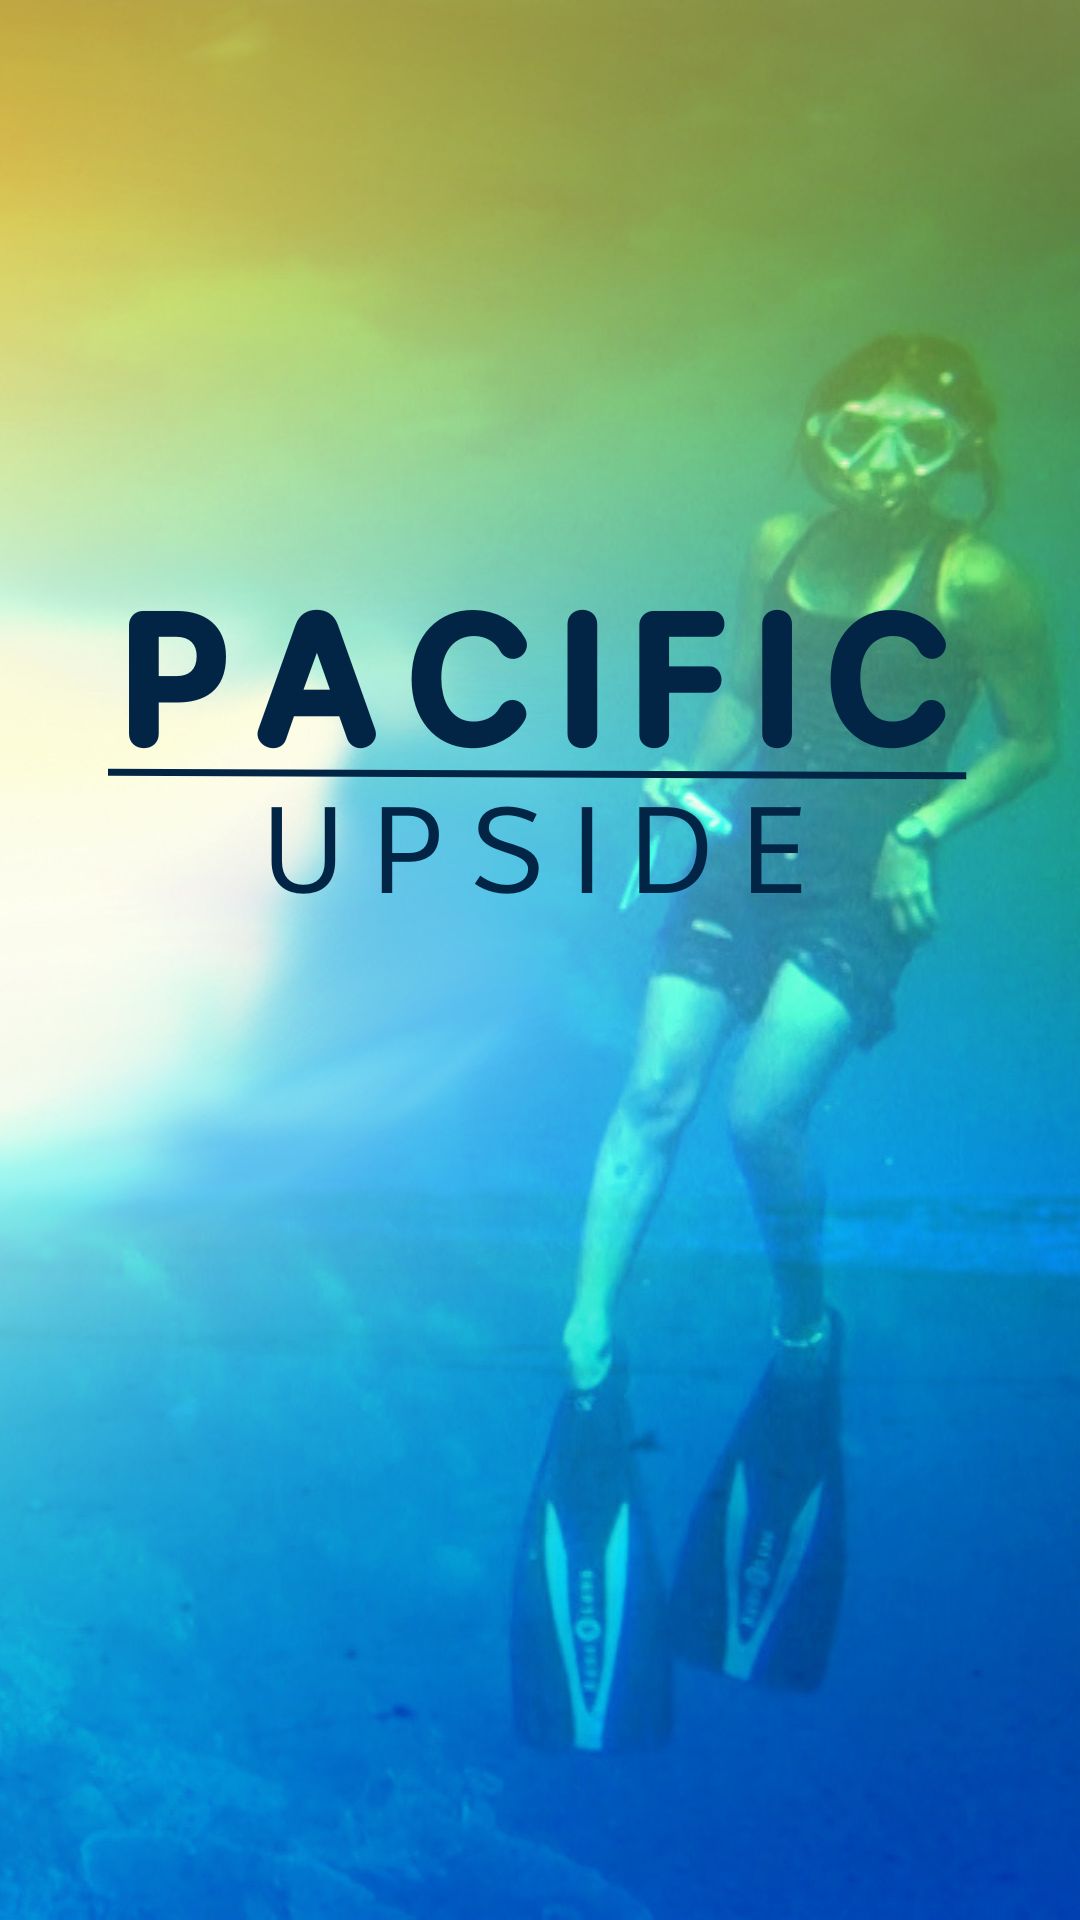 Pacific upside-SWS-mobile-banner-img